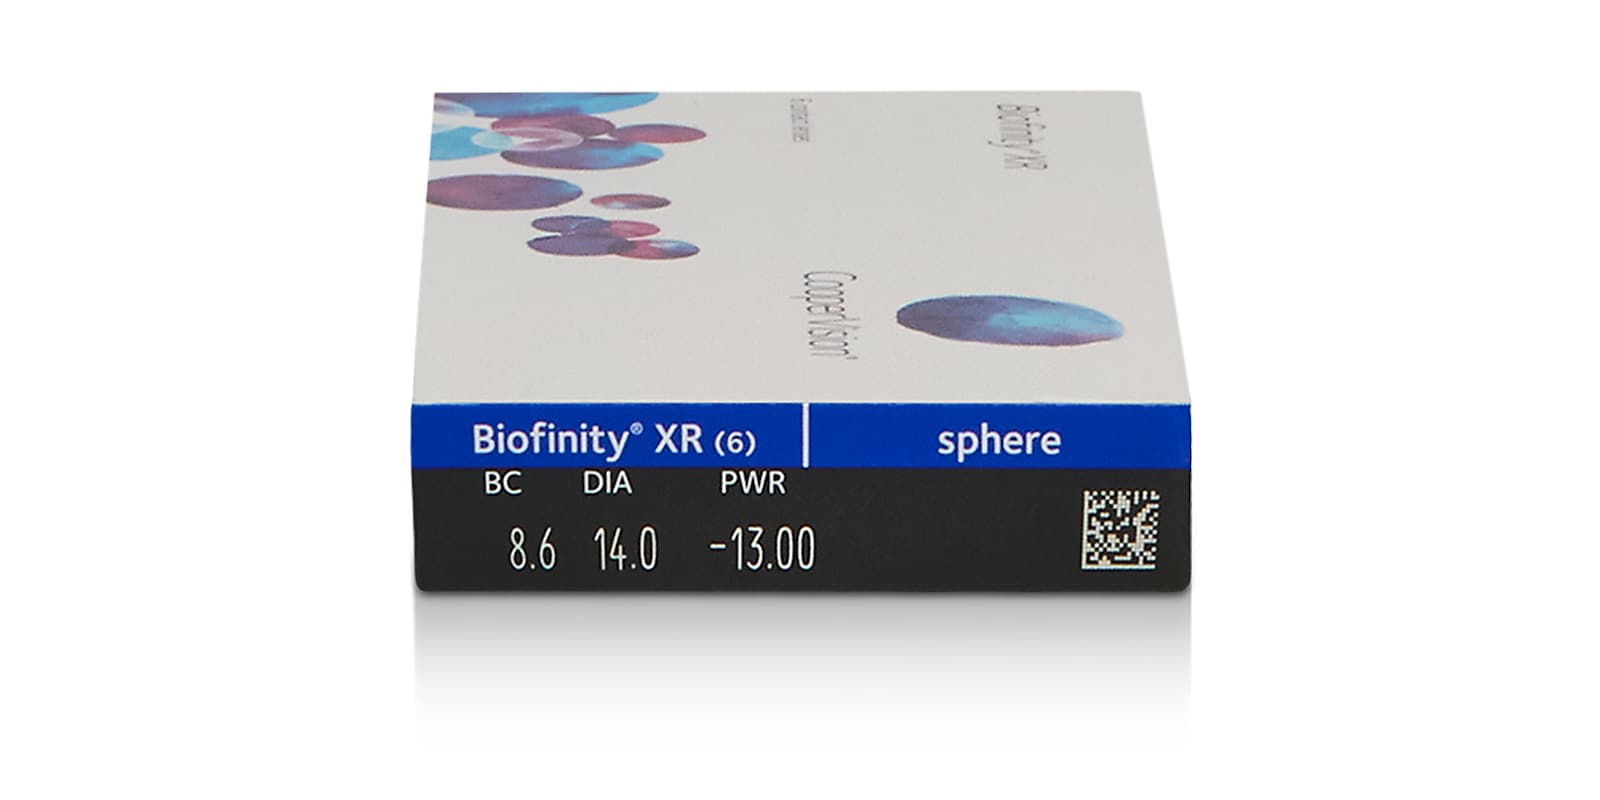 biofinity-xr-6-pack-contactsdirect